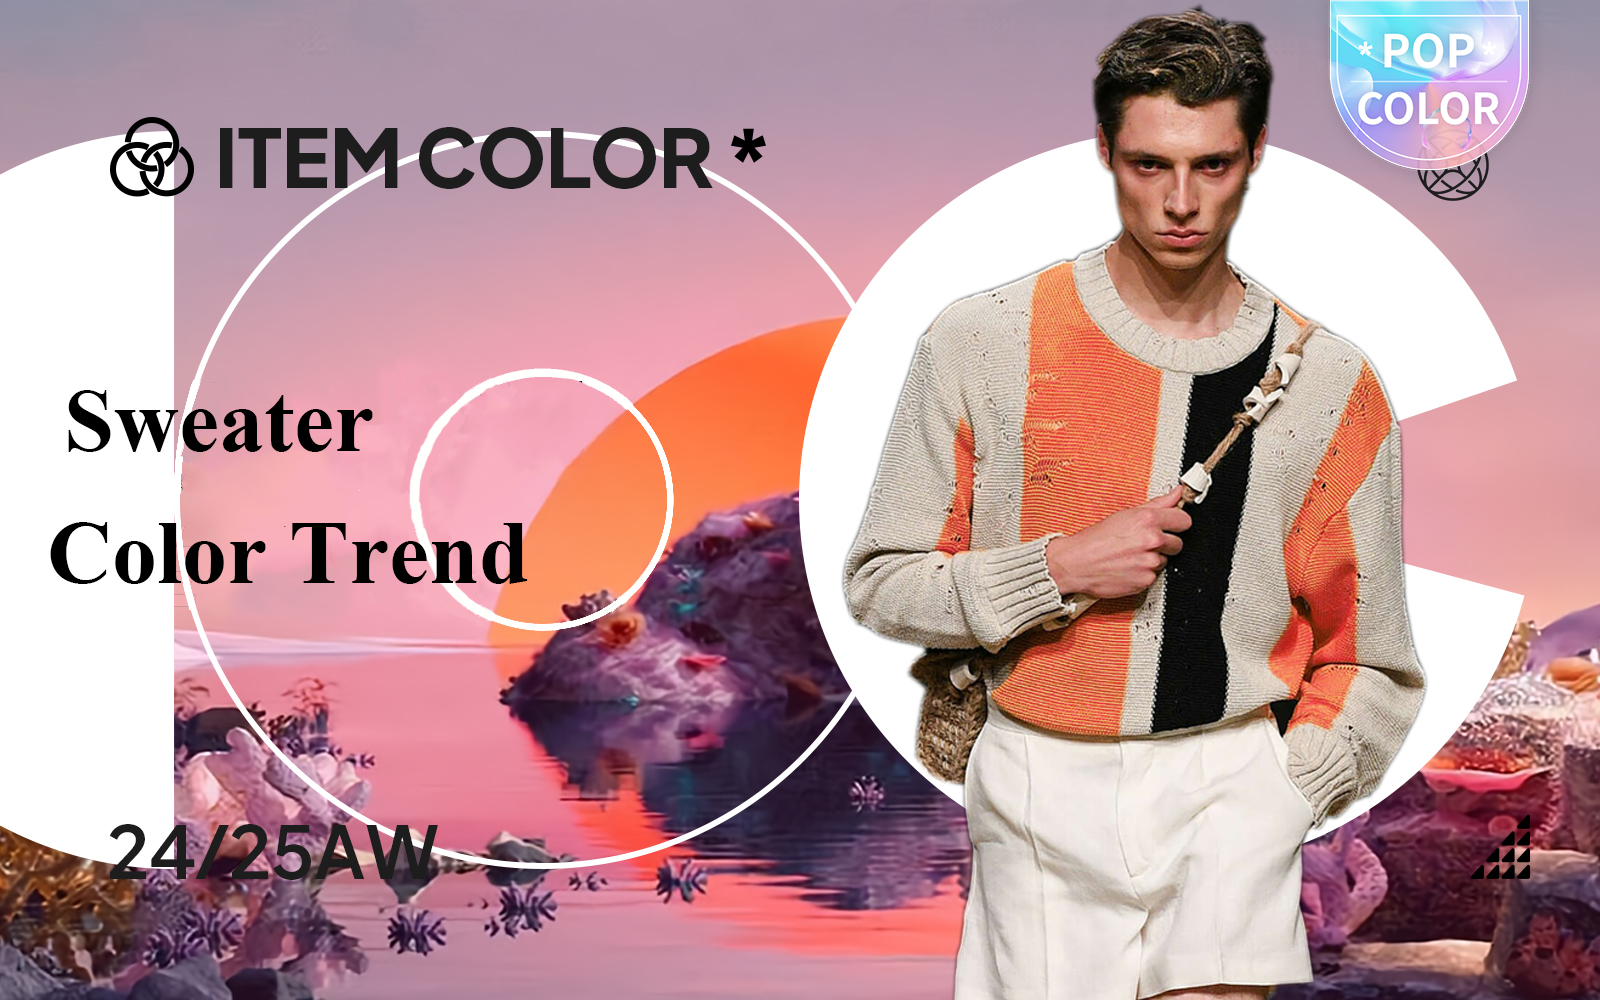 Melting & Healing -- The Color Trend for Men's Sweater